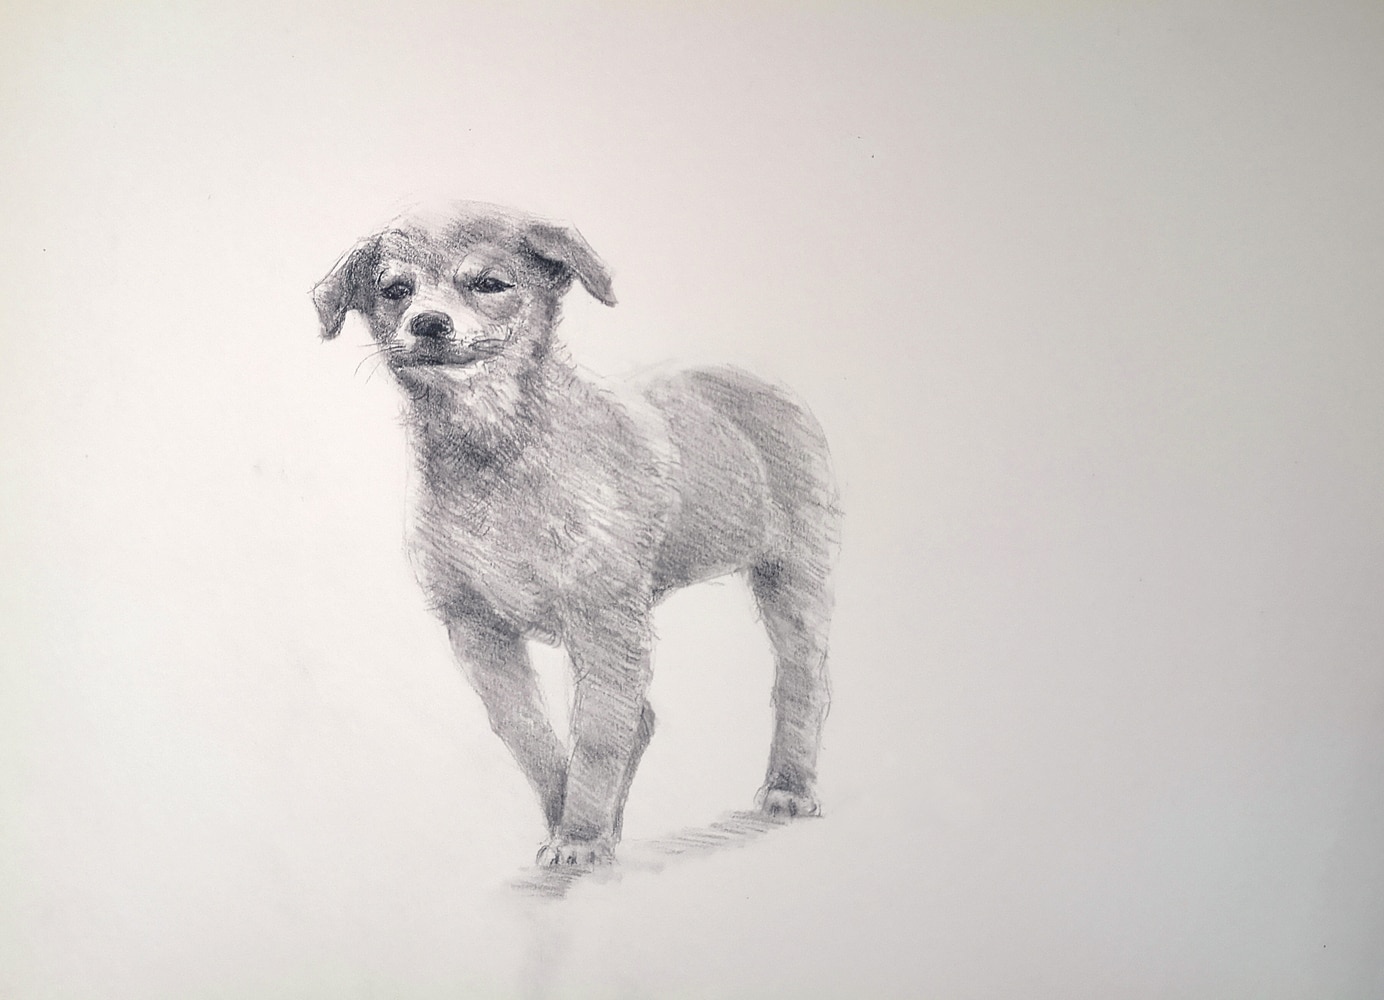 How to draw a dog - easy step by step video tutorial